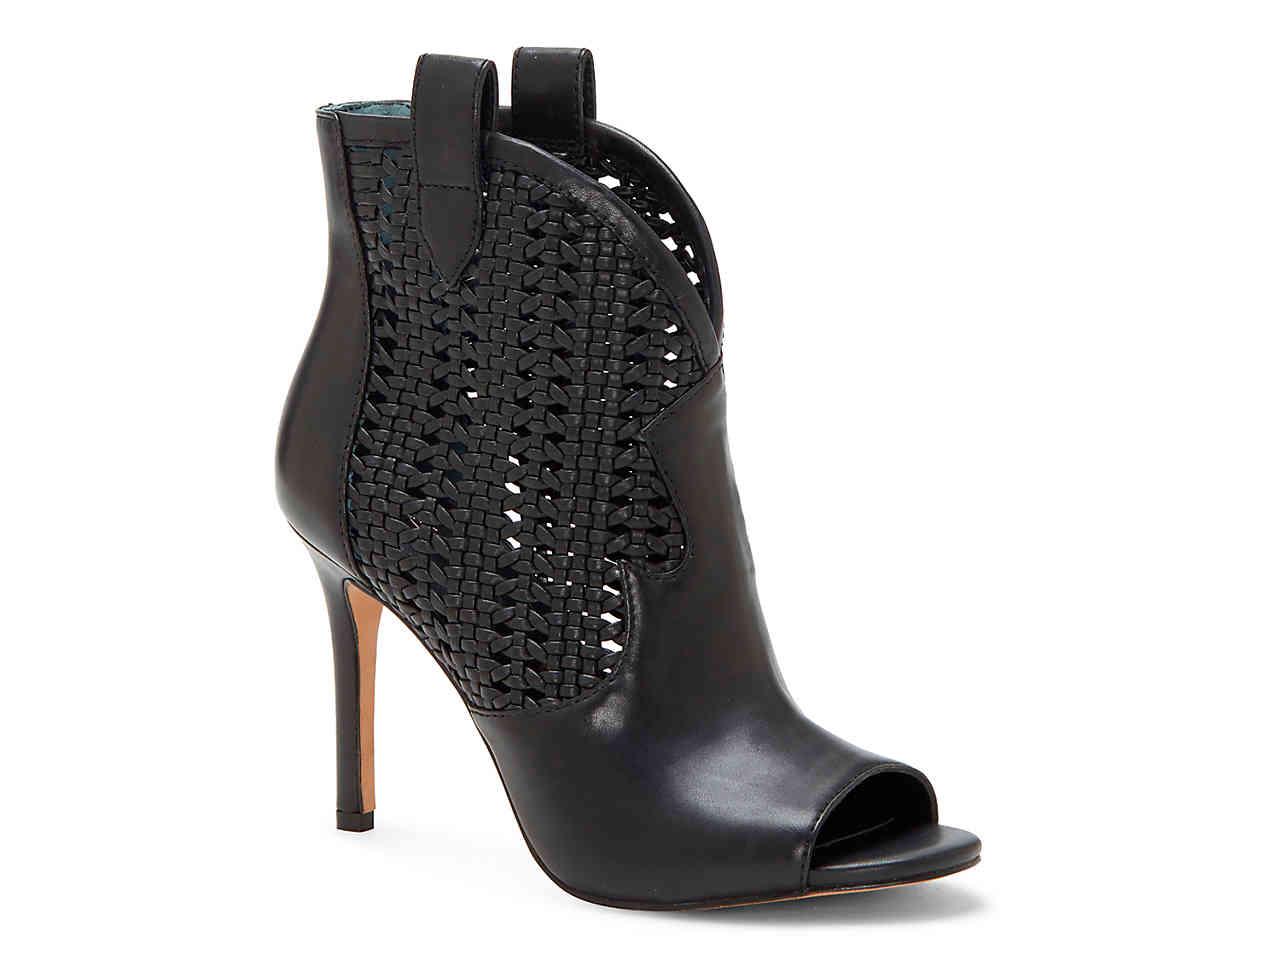 Jessica Simpson Leather Jexell Sandal Bootie in Black Leather (Black ...